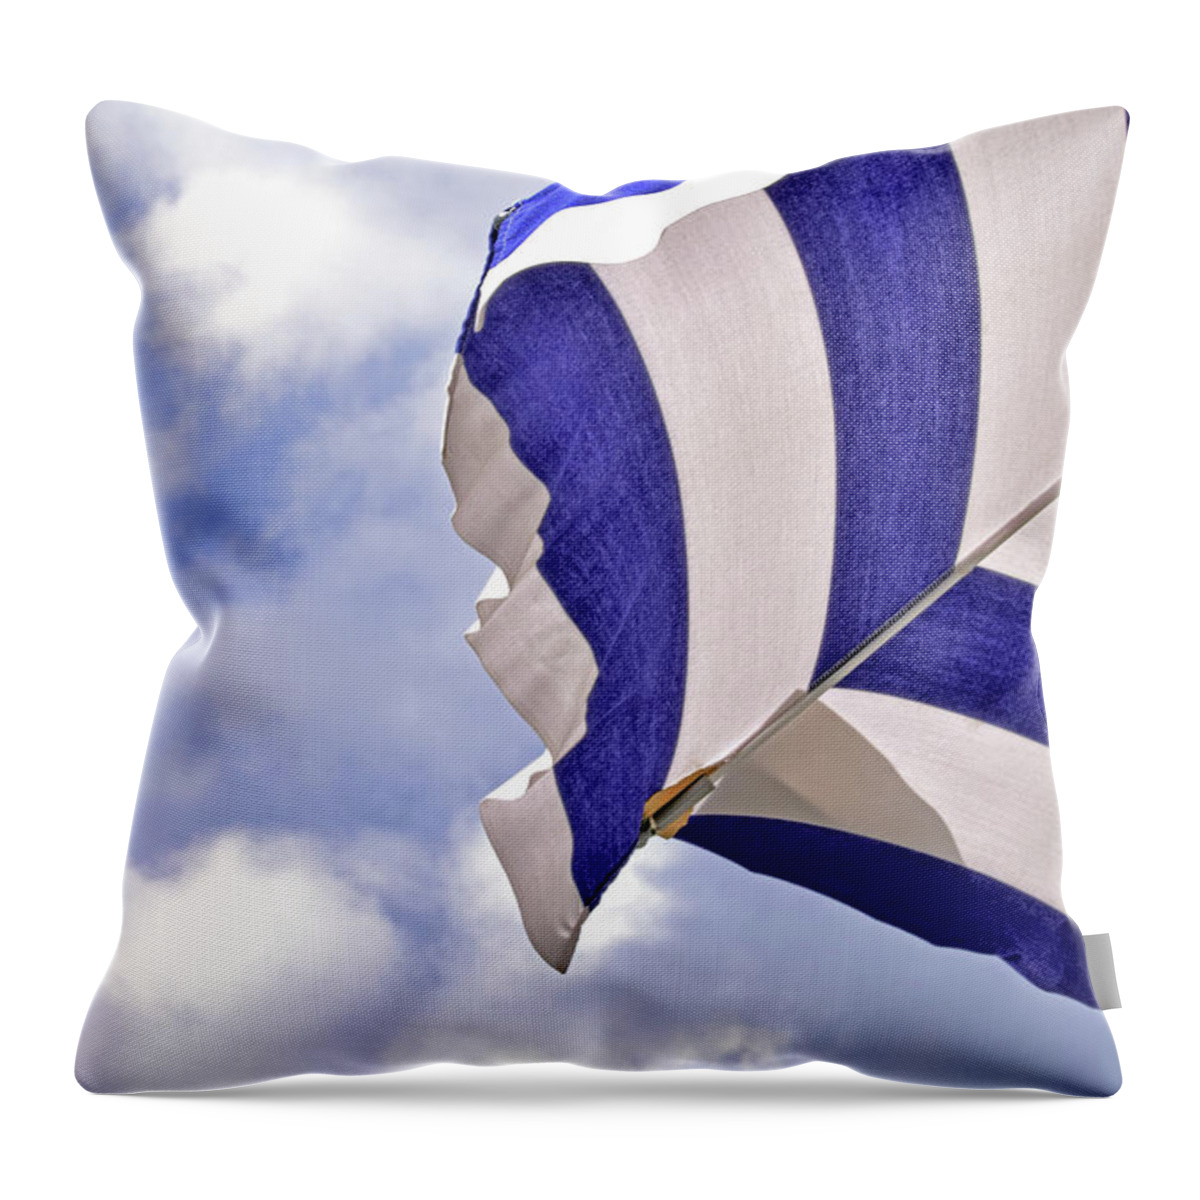 Striped Throw Pillow featuring the photograph Striped by Sandy Taylor